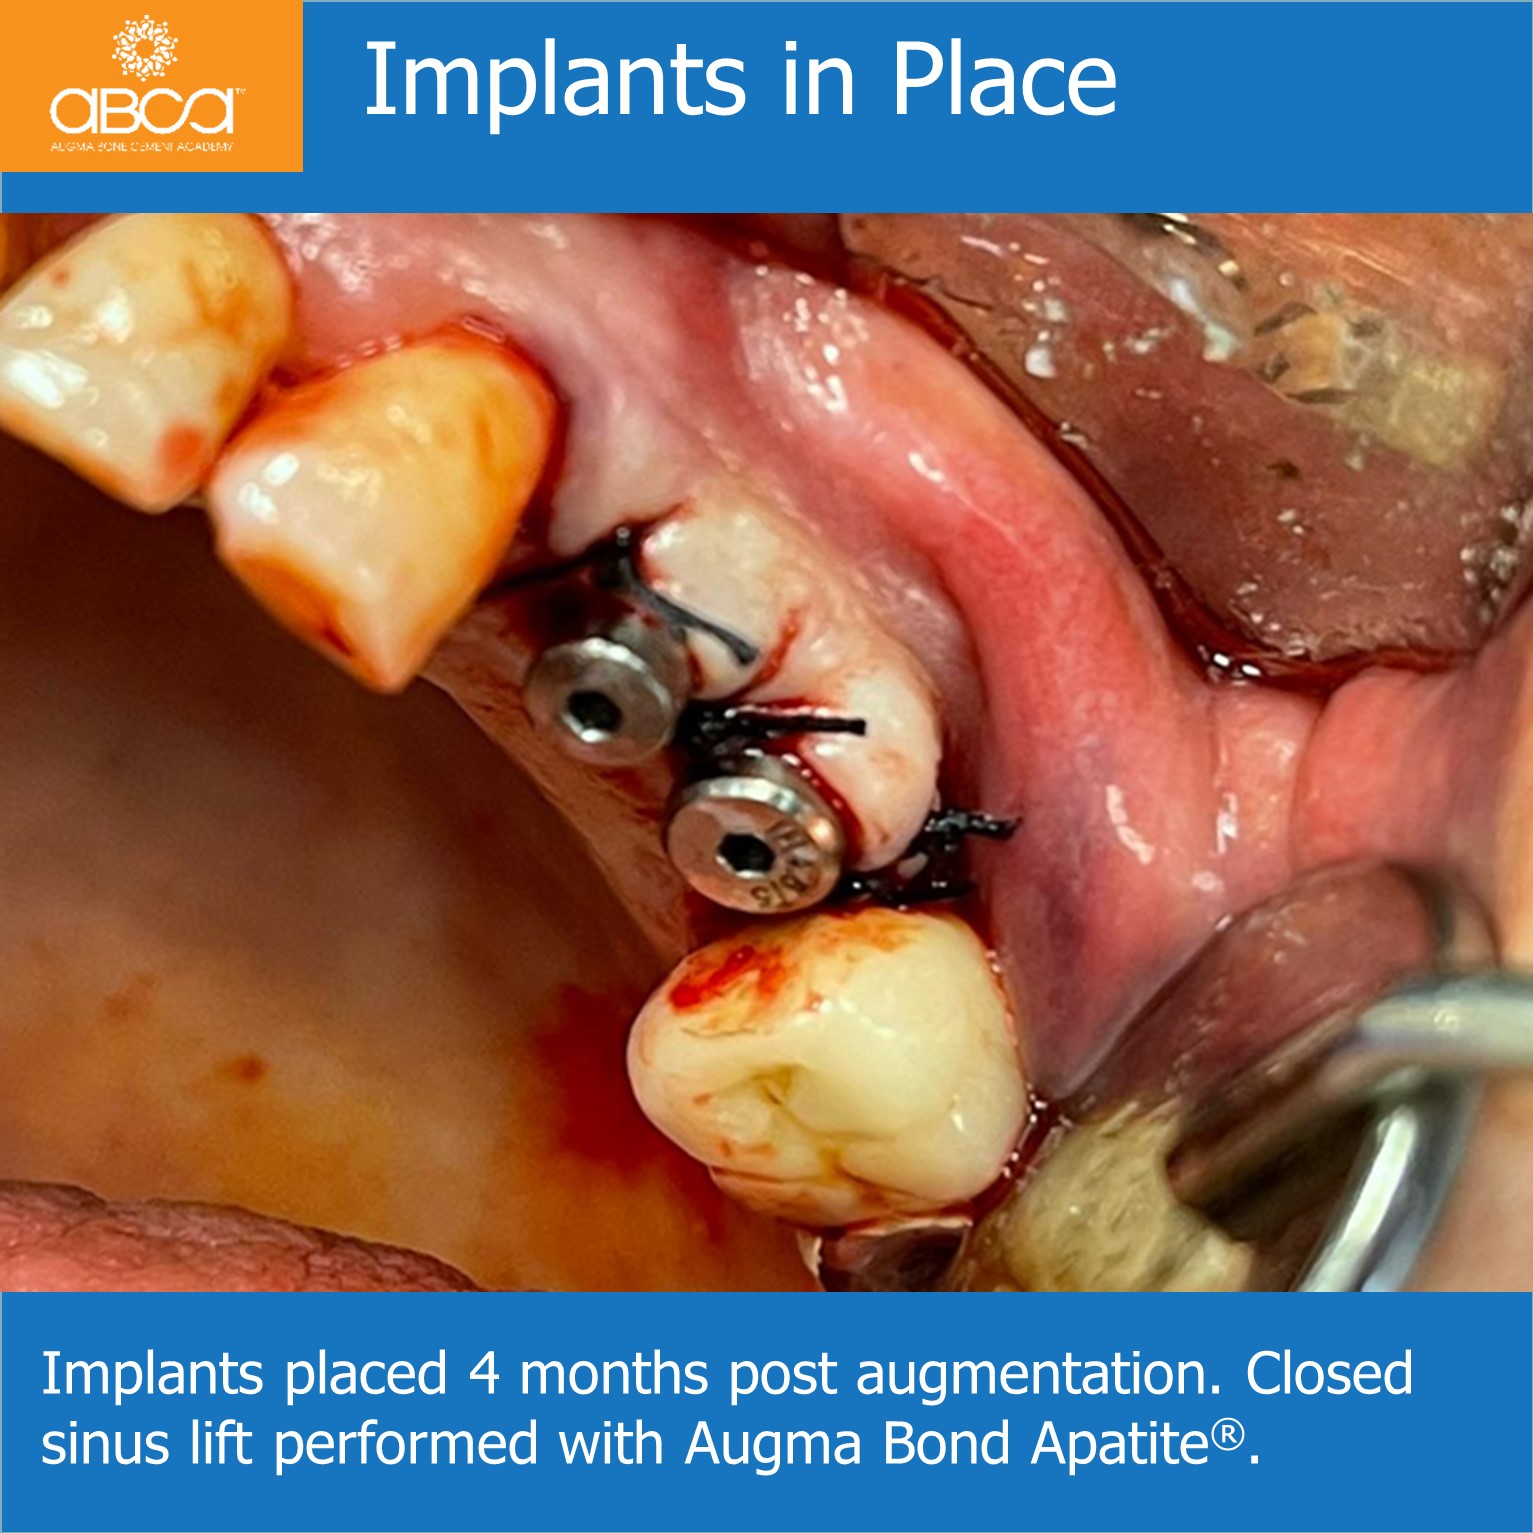 Implants in Place - Implants placed 4 months post augmentation. Closed sinus lift performed with Augma Bond Apatite®